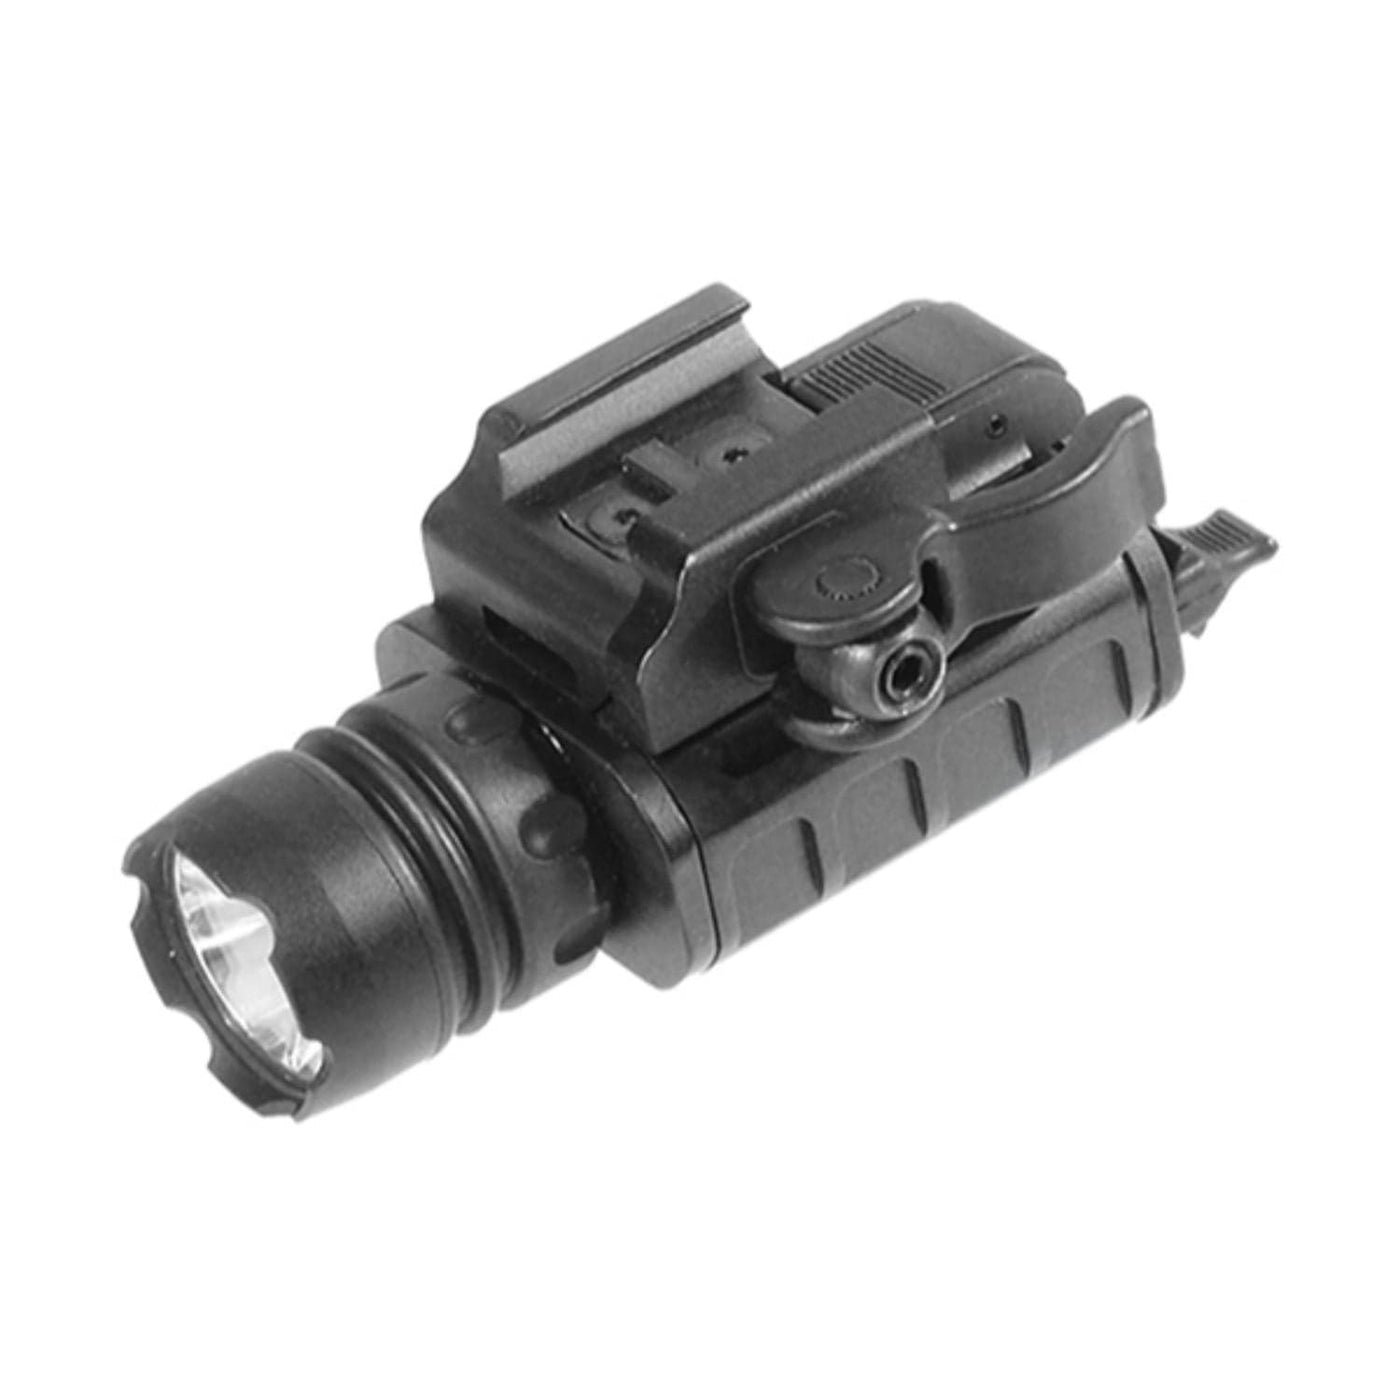 Leapers Leapers UTG Compact LED Weapon Light 400 Lum w QD Lever Lock Lights